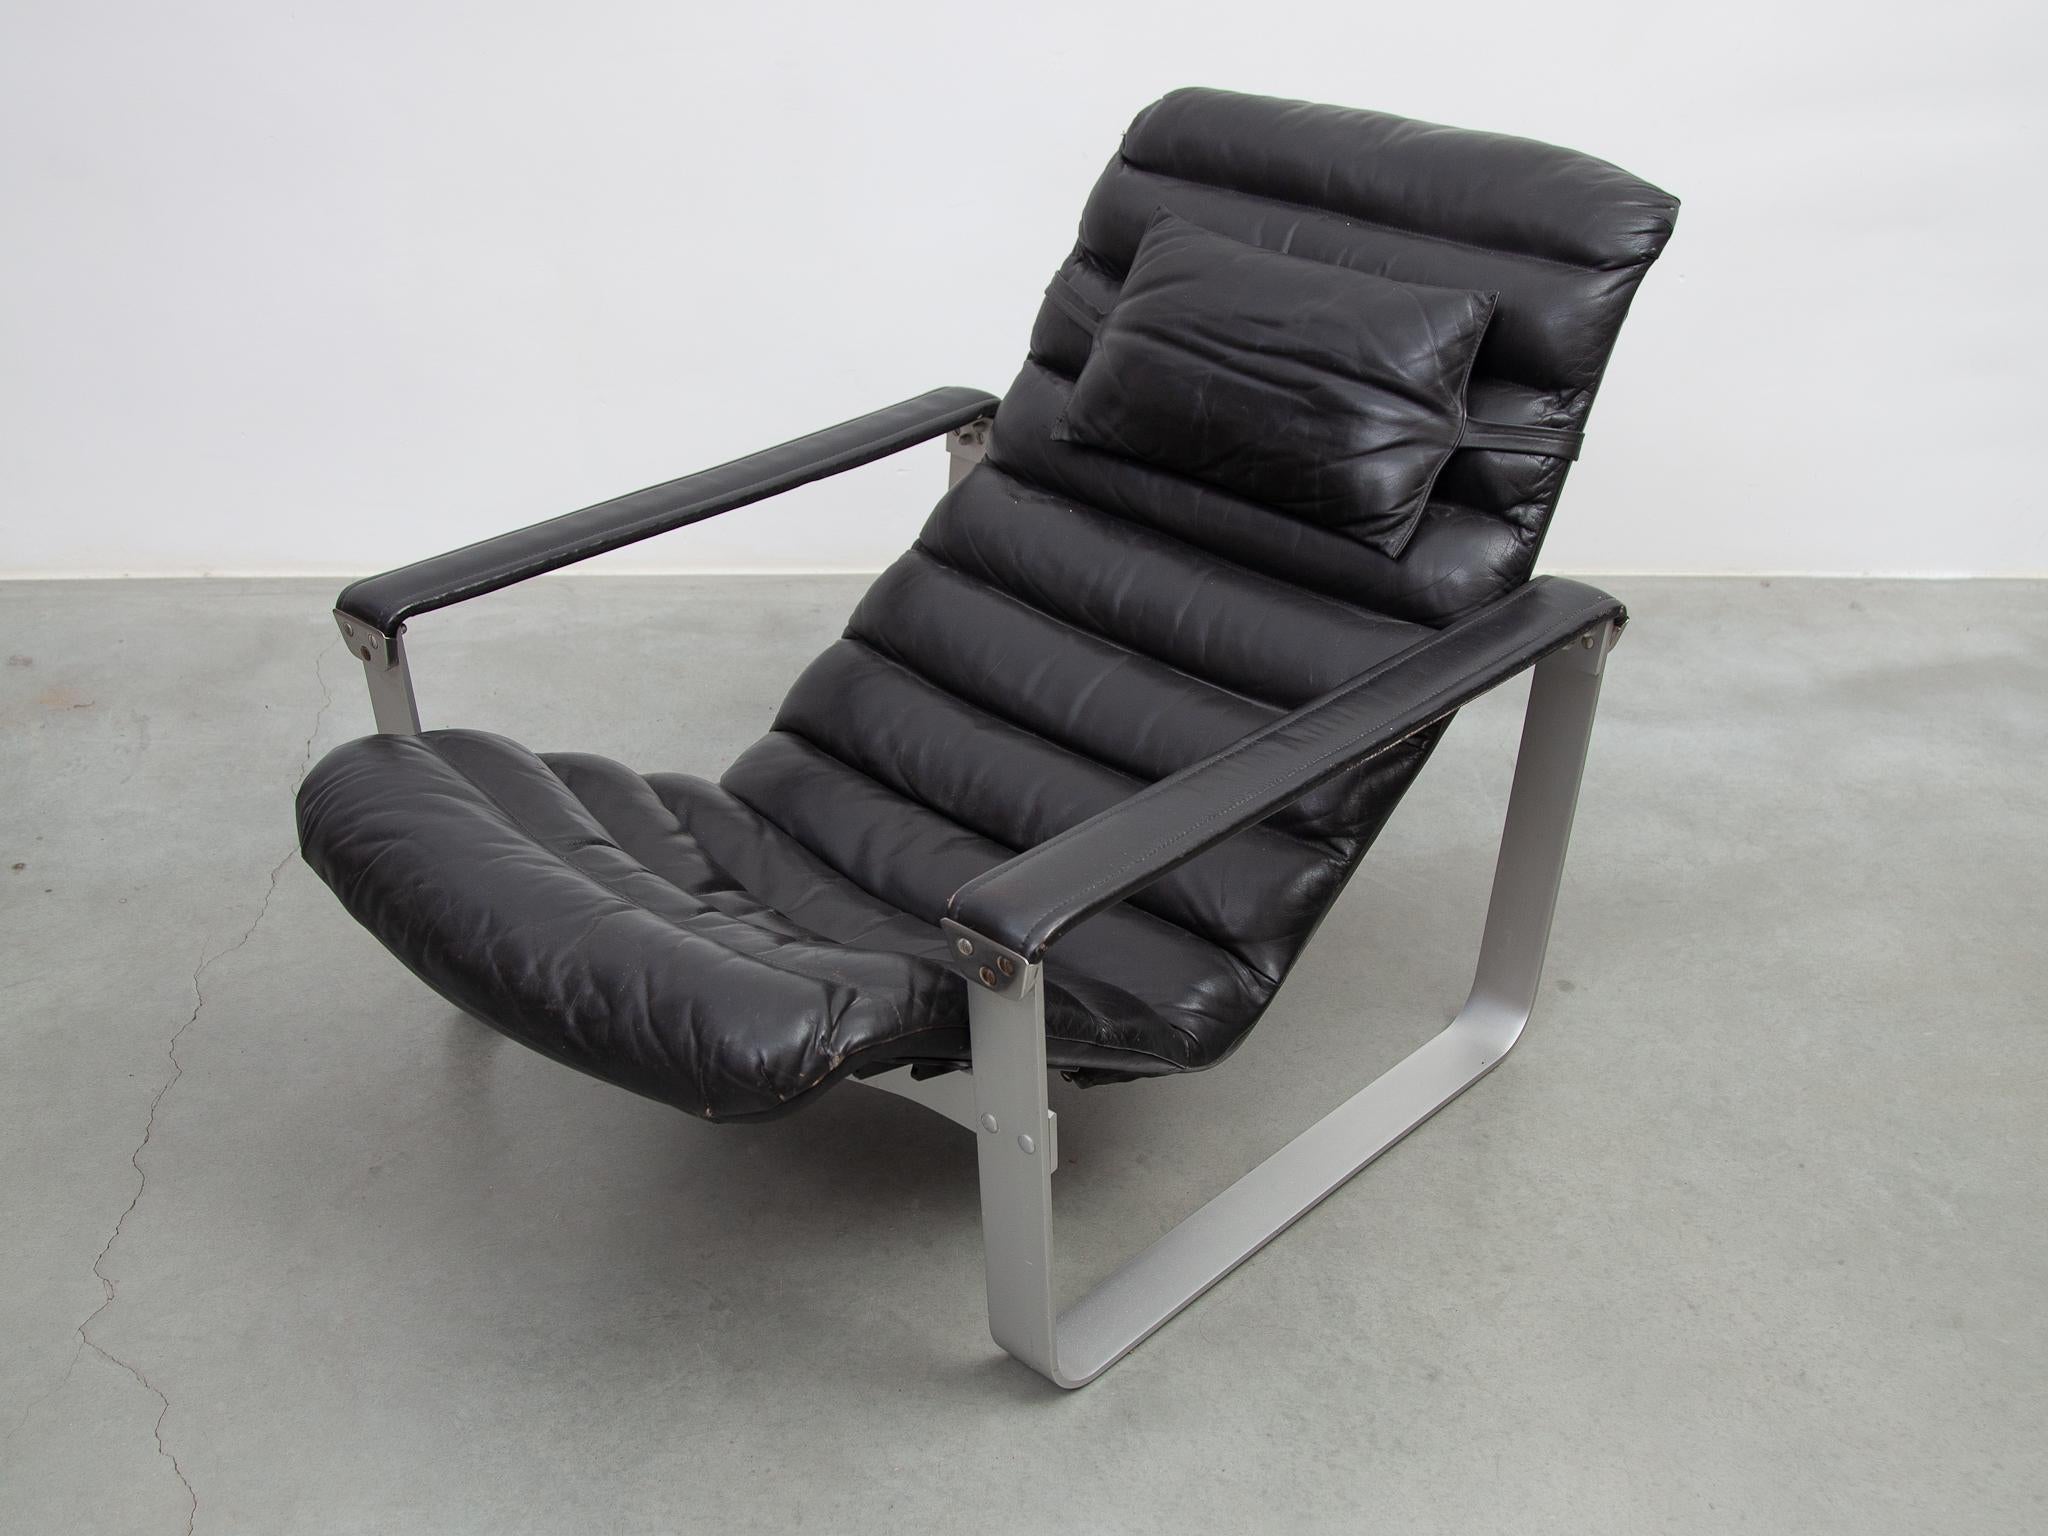 Pulkka Lounge Chair designed by Ilmari Lappalainen by ASKO, Finland, 1968 For Sale 2